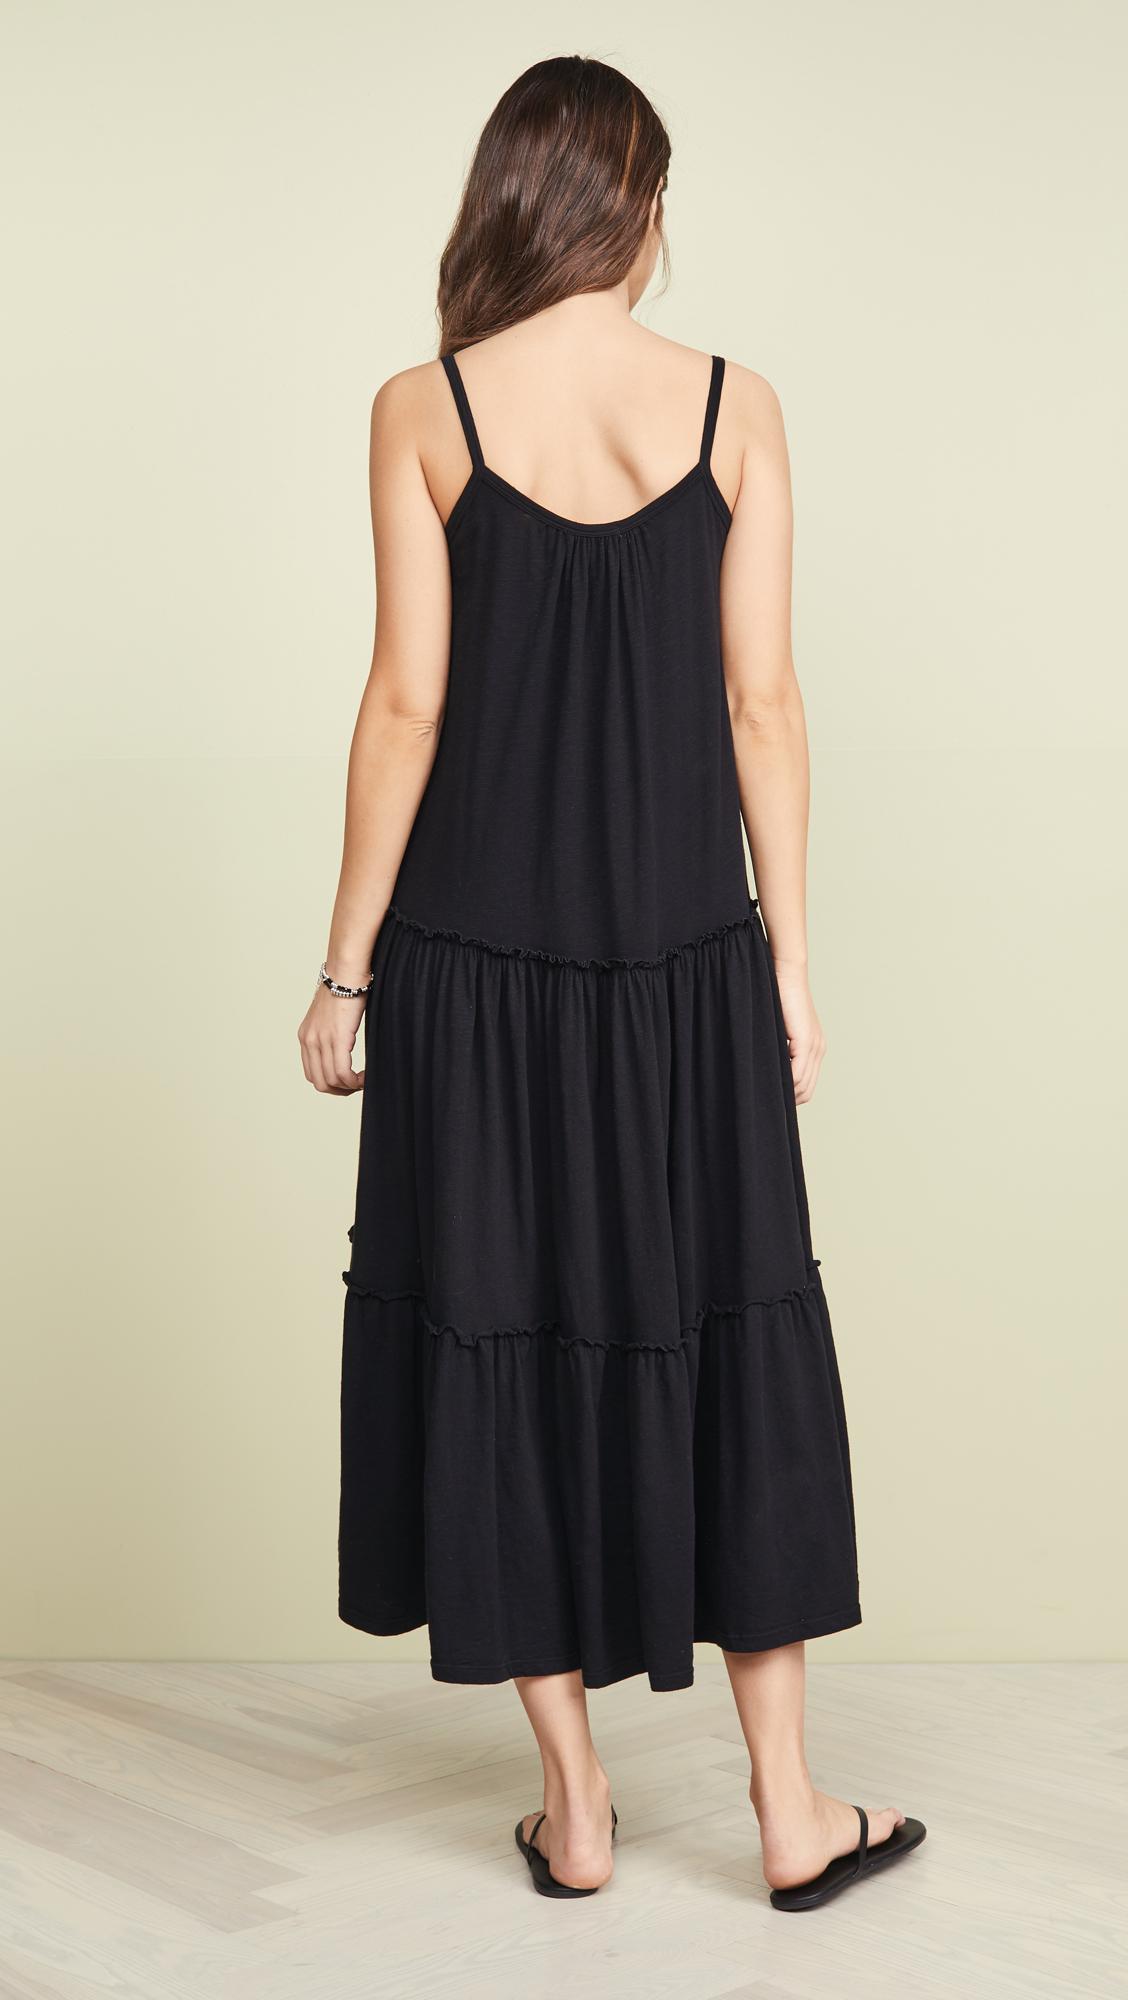 Sundry Cotton Tiered Maxi Dress in Black - Lyst